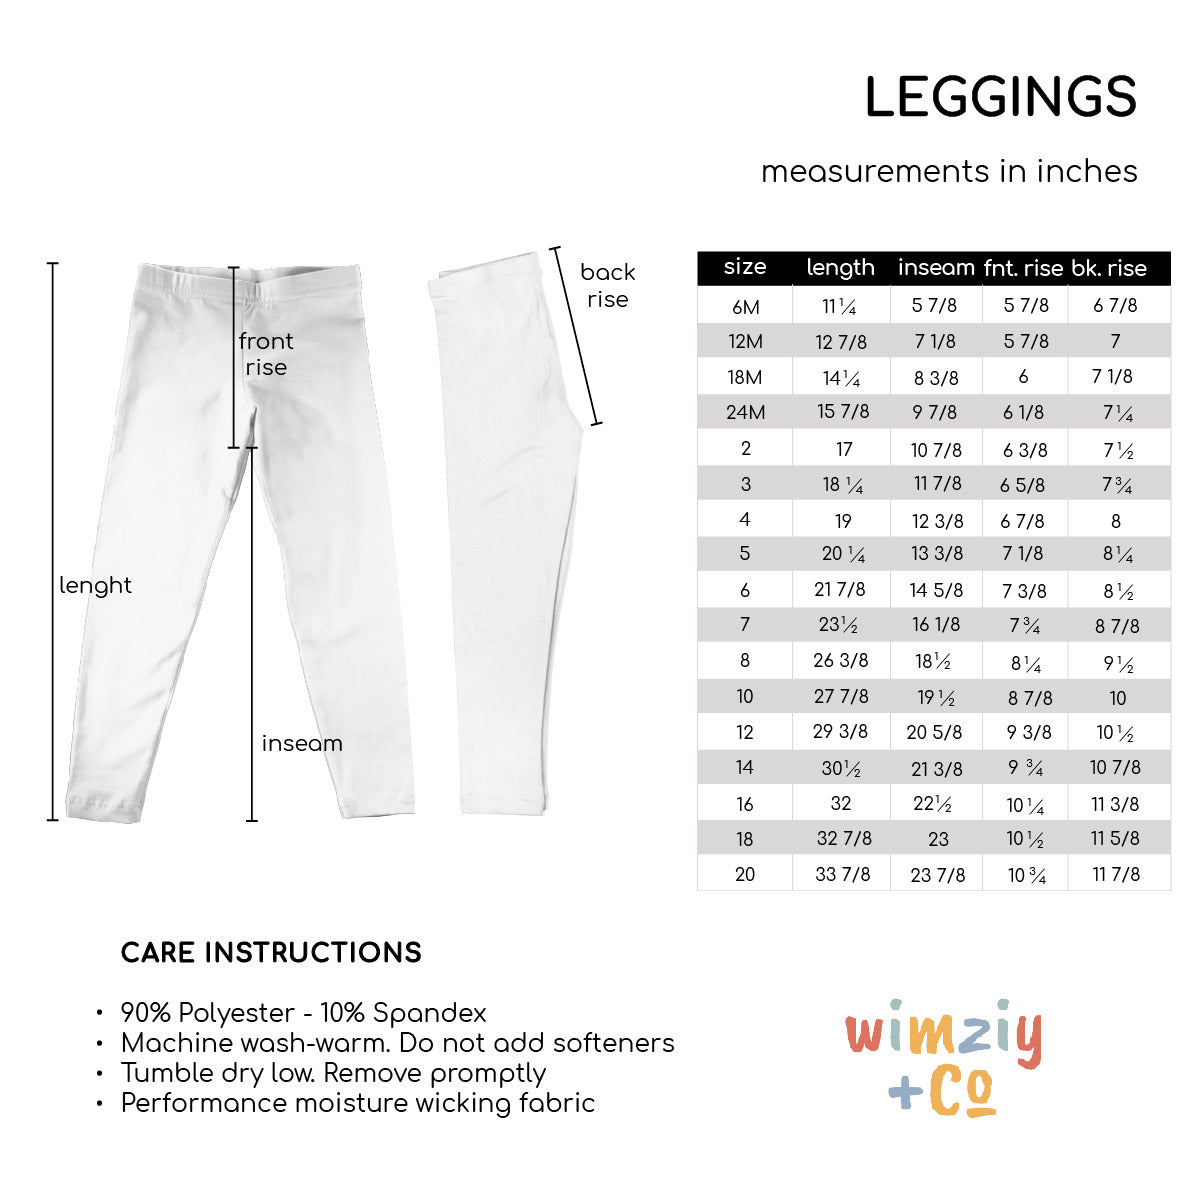 White leggings with age printed all over - Wimziy&Co.